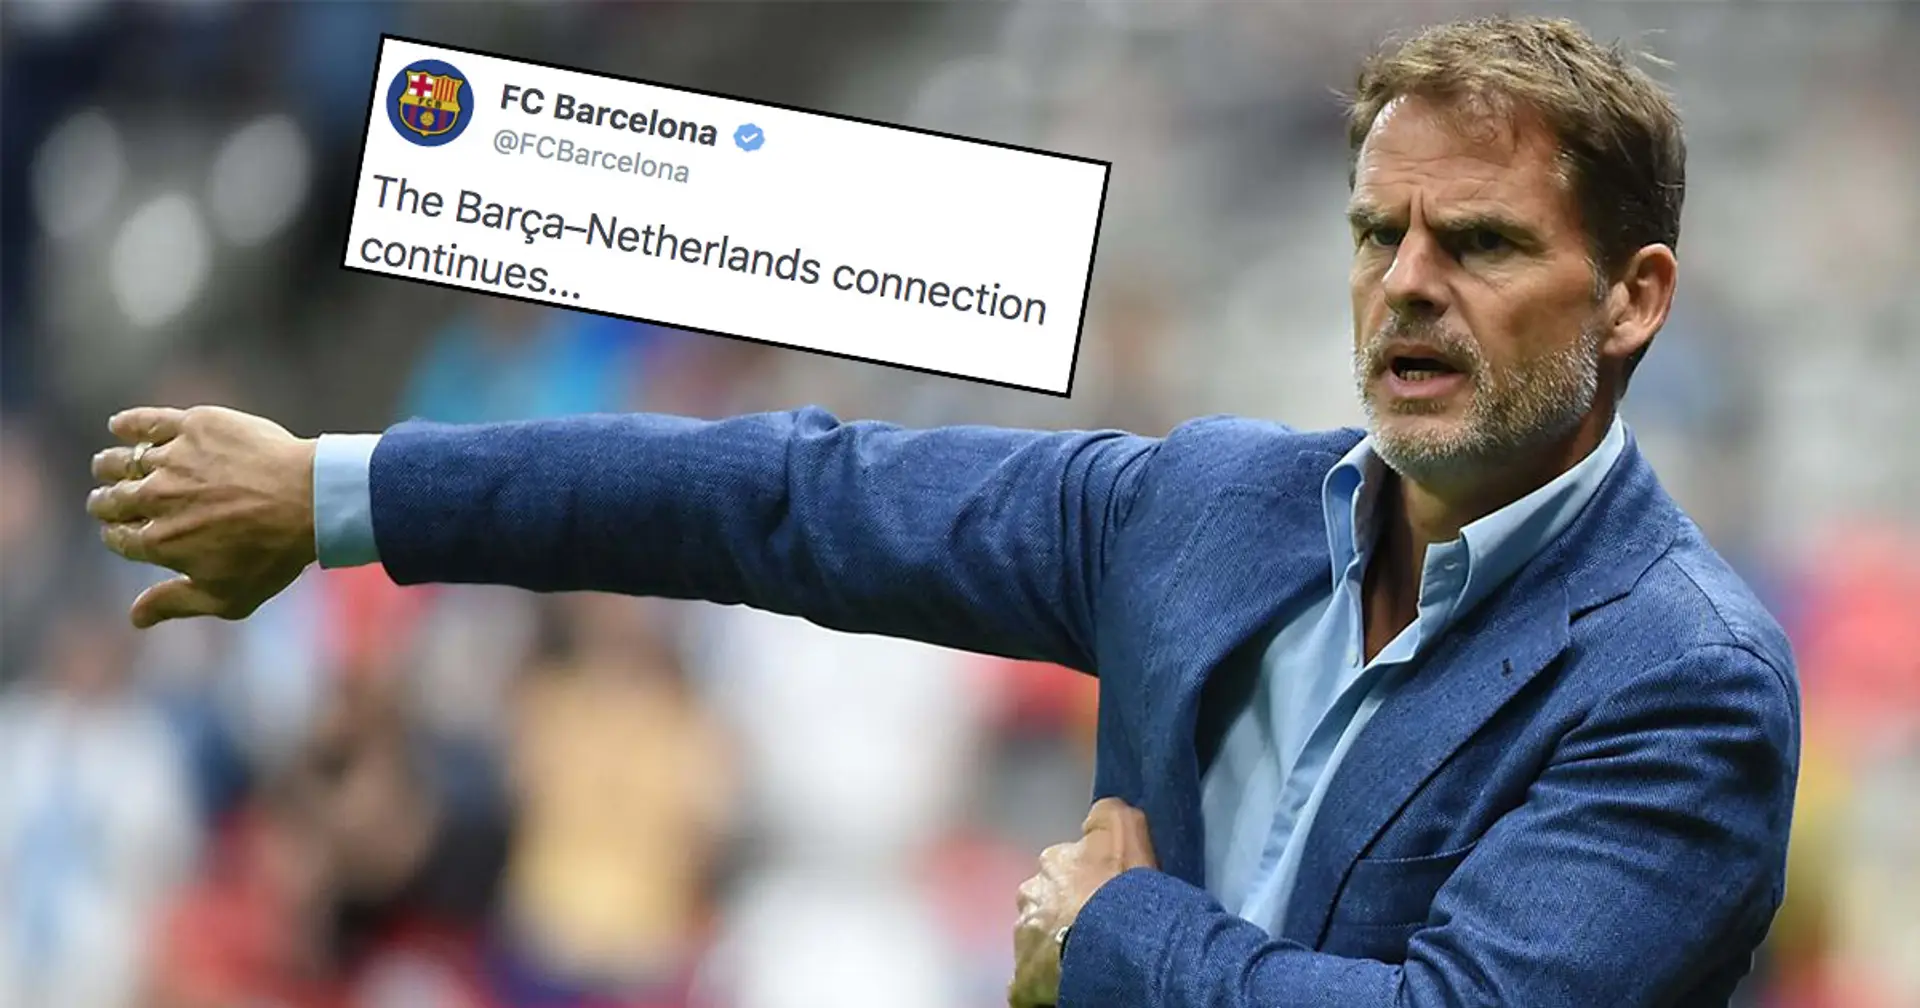 Barca's official Twitter account sparks wave of annoyance after announcing Frank de Boer to the Netherlands